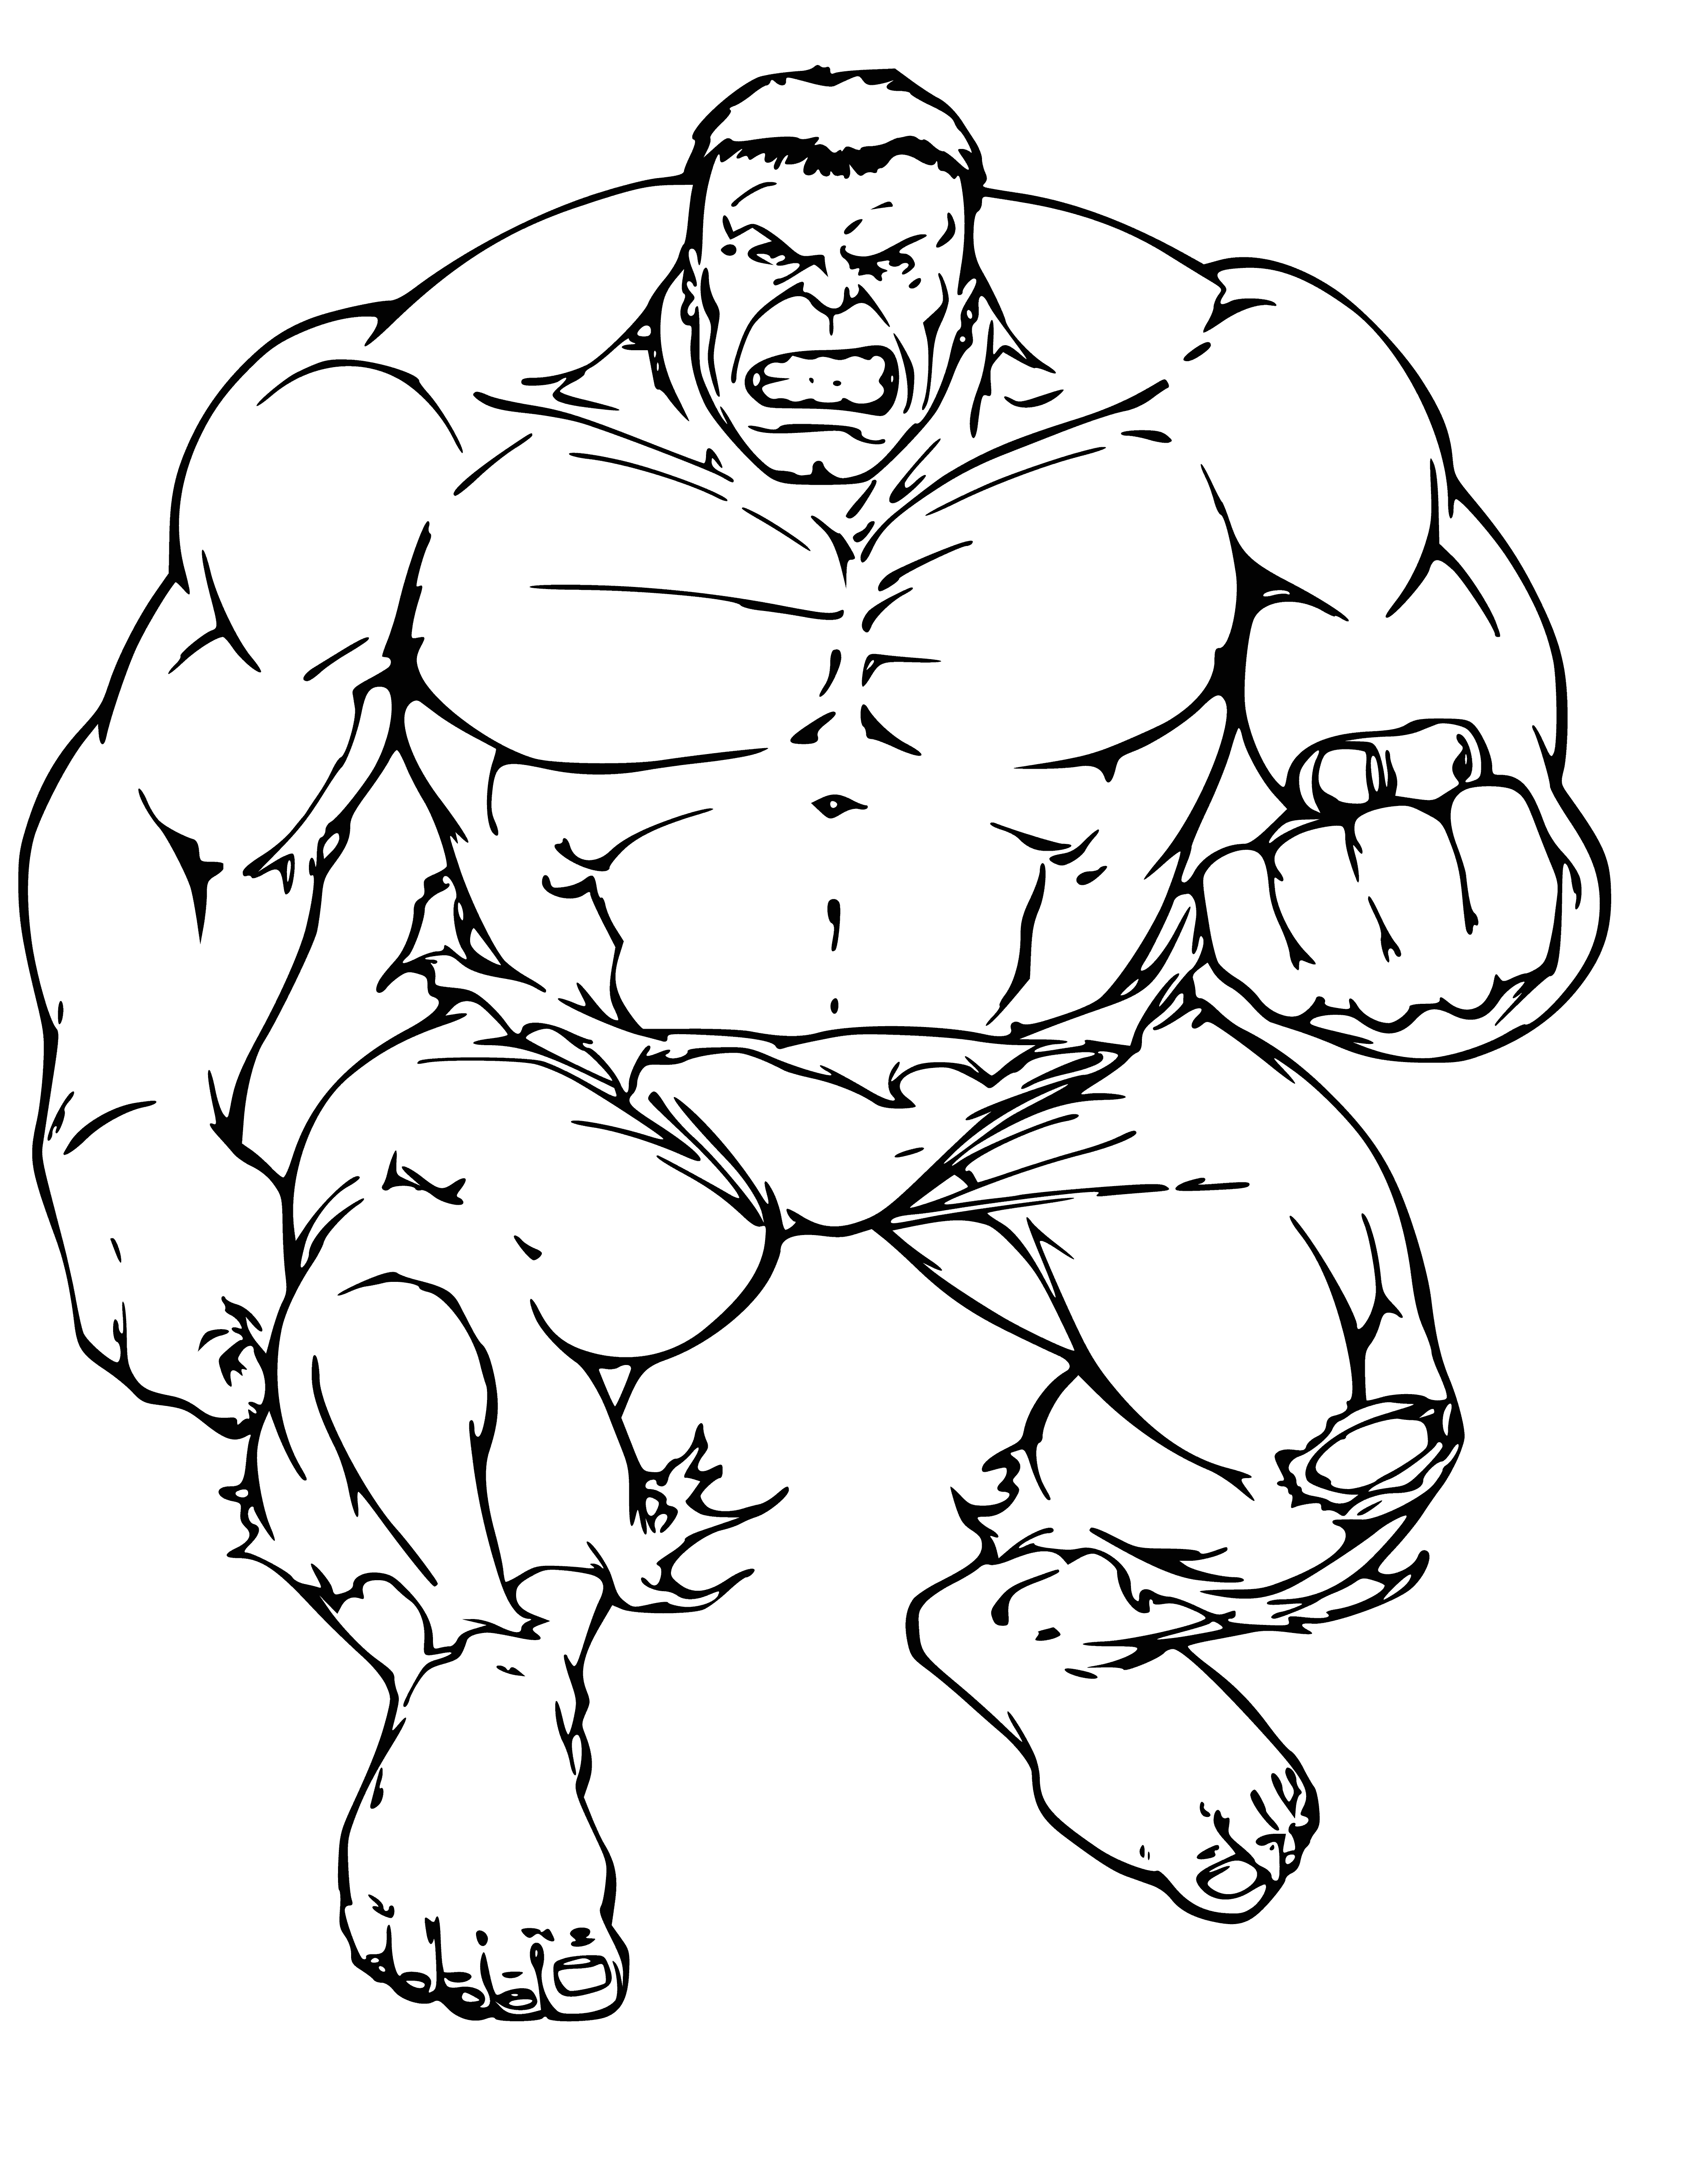 coloring page: A giant, muscular figure stands with a raised fist in the centre of a coloring page; green skin and purple pants; eyes and mouth open in a powerful roar. #coloringpage